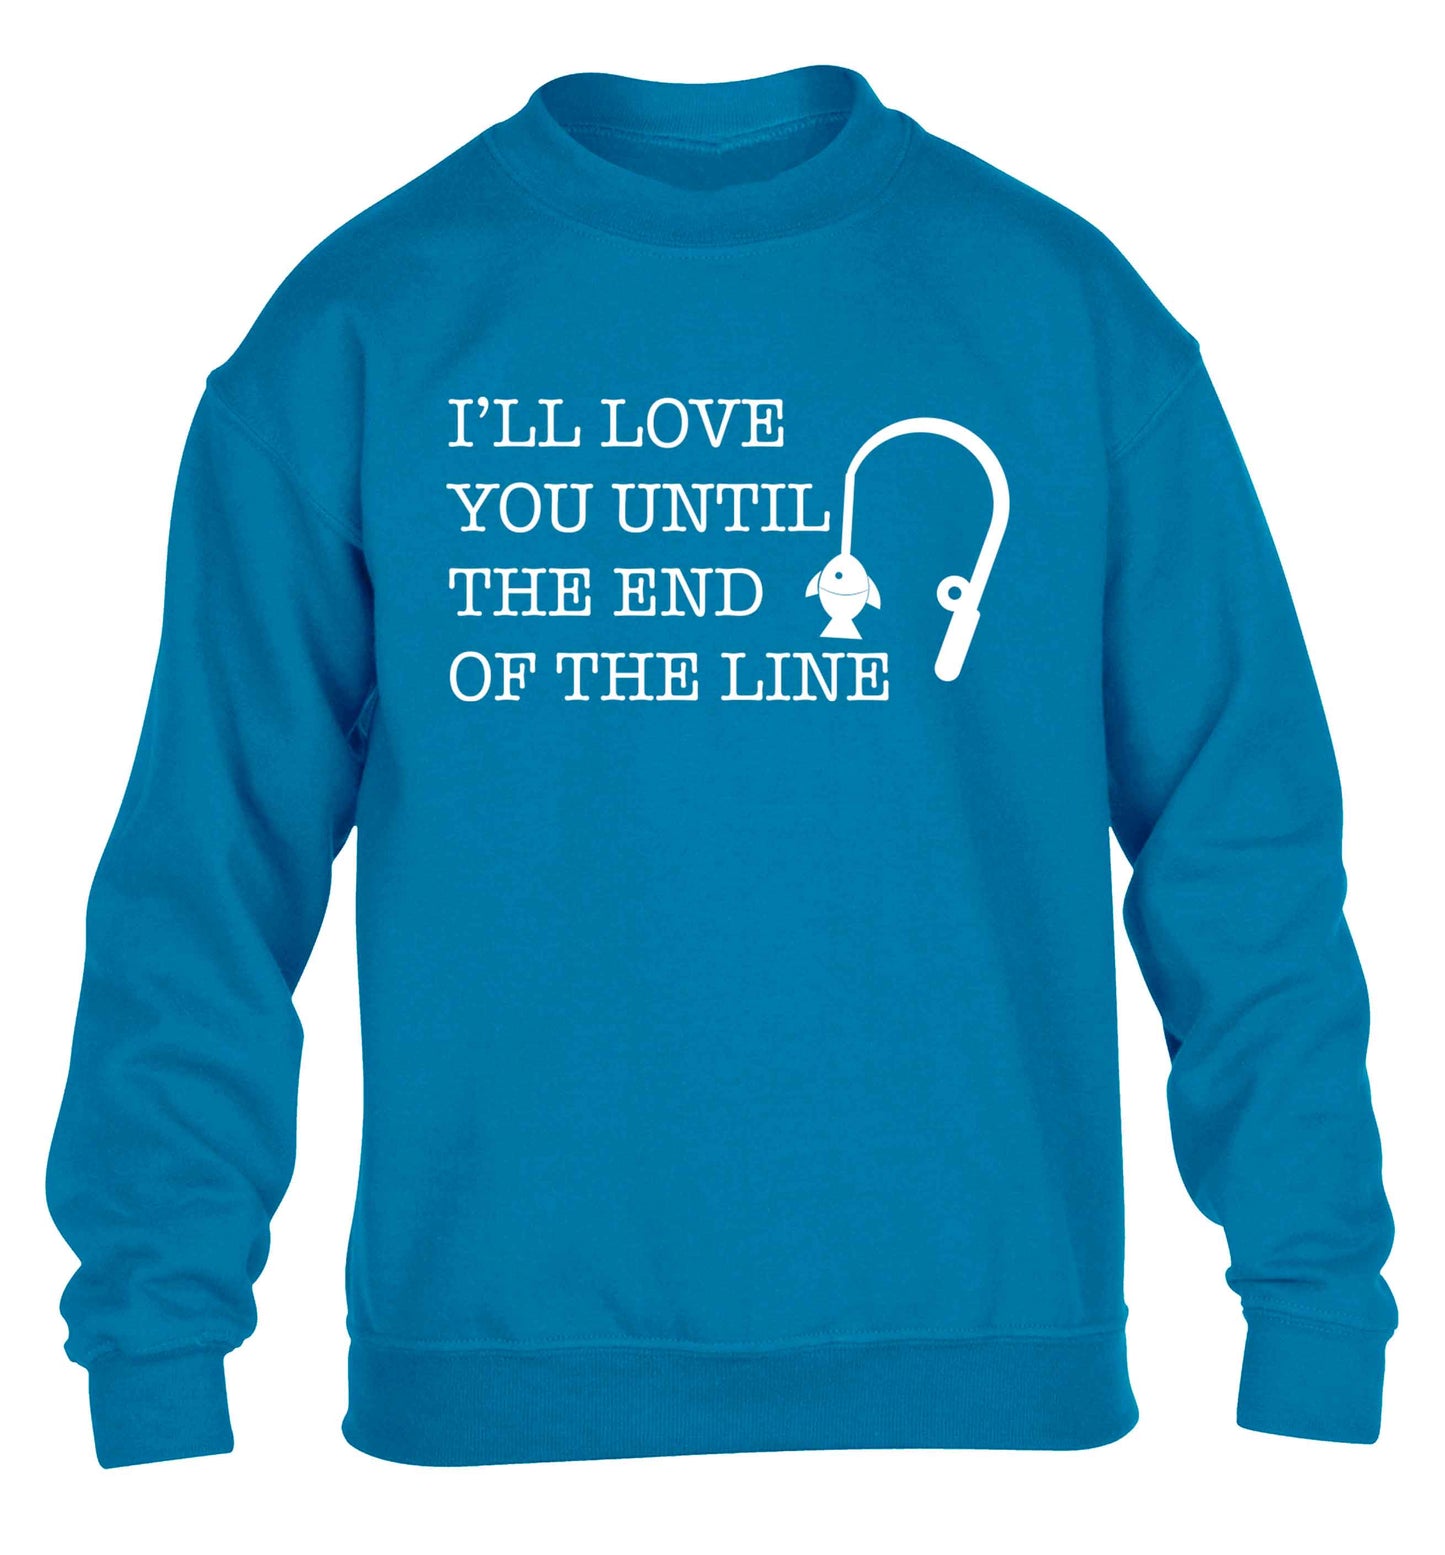 I'll love you until the end of the line children's blue sweater 12-13 Years